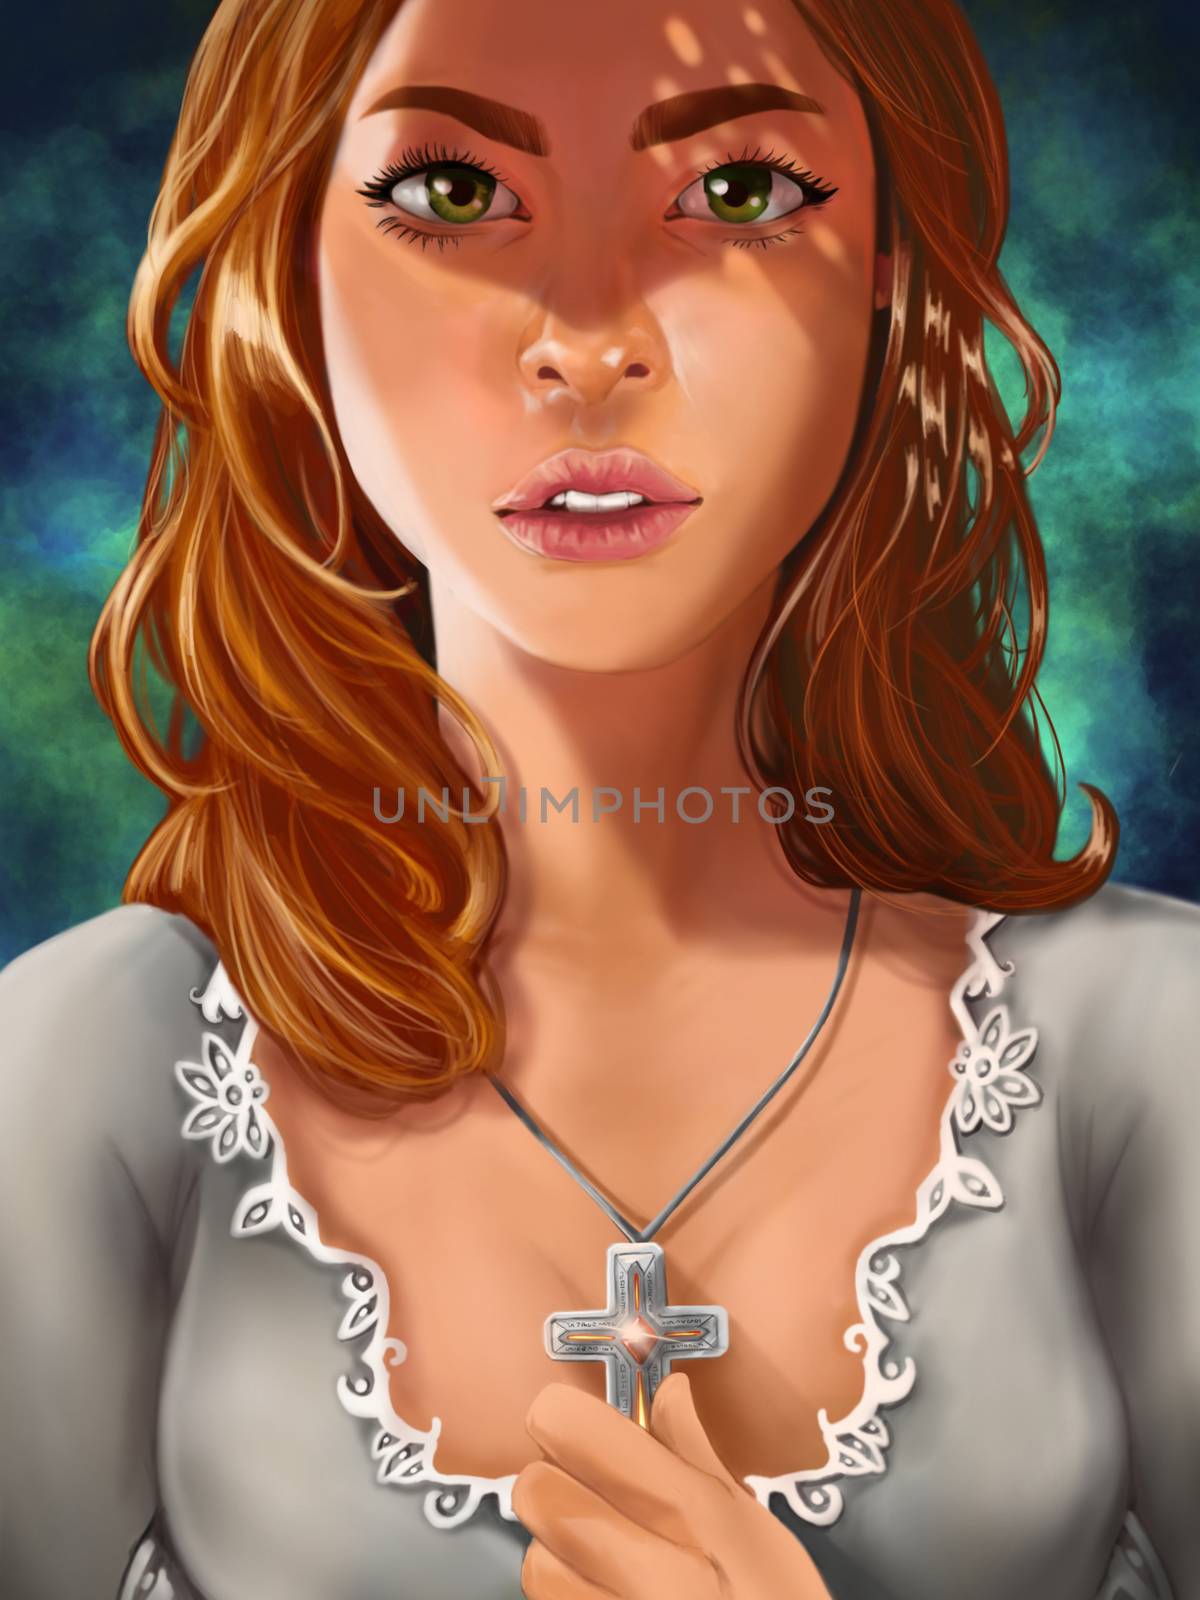 Digital painting of fantasy young princess holding a cross necklace portrait close up